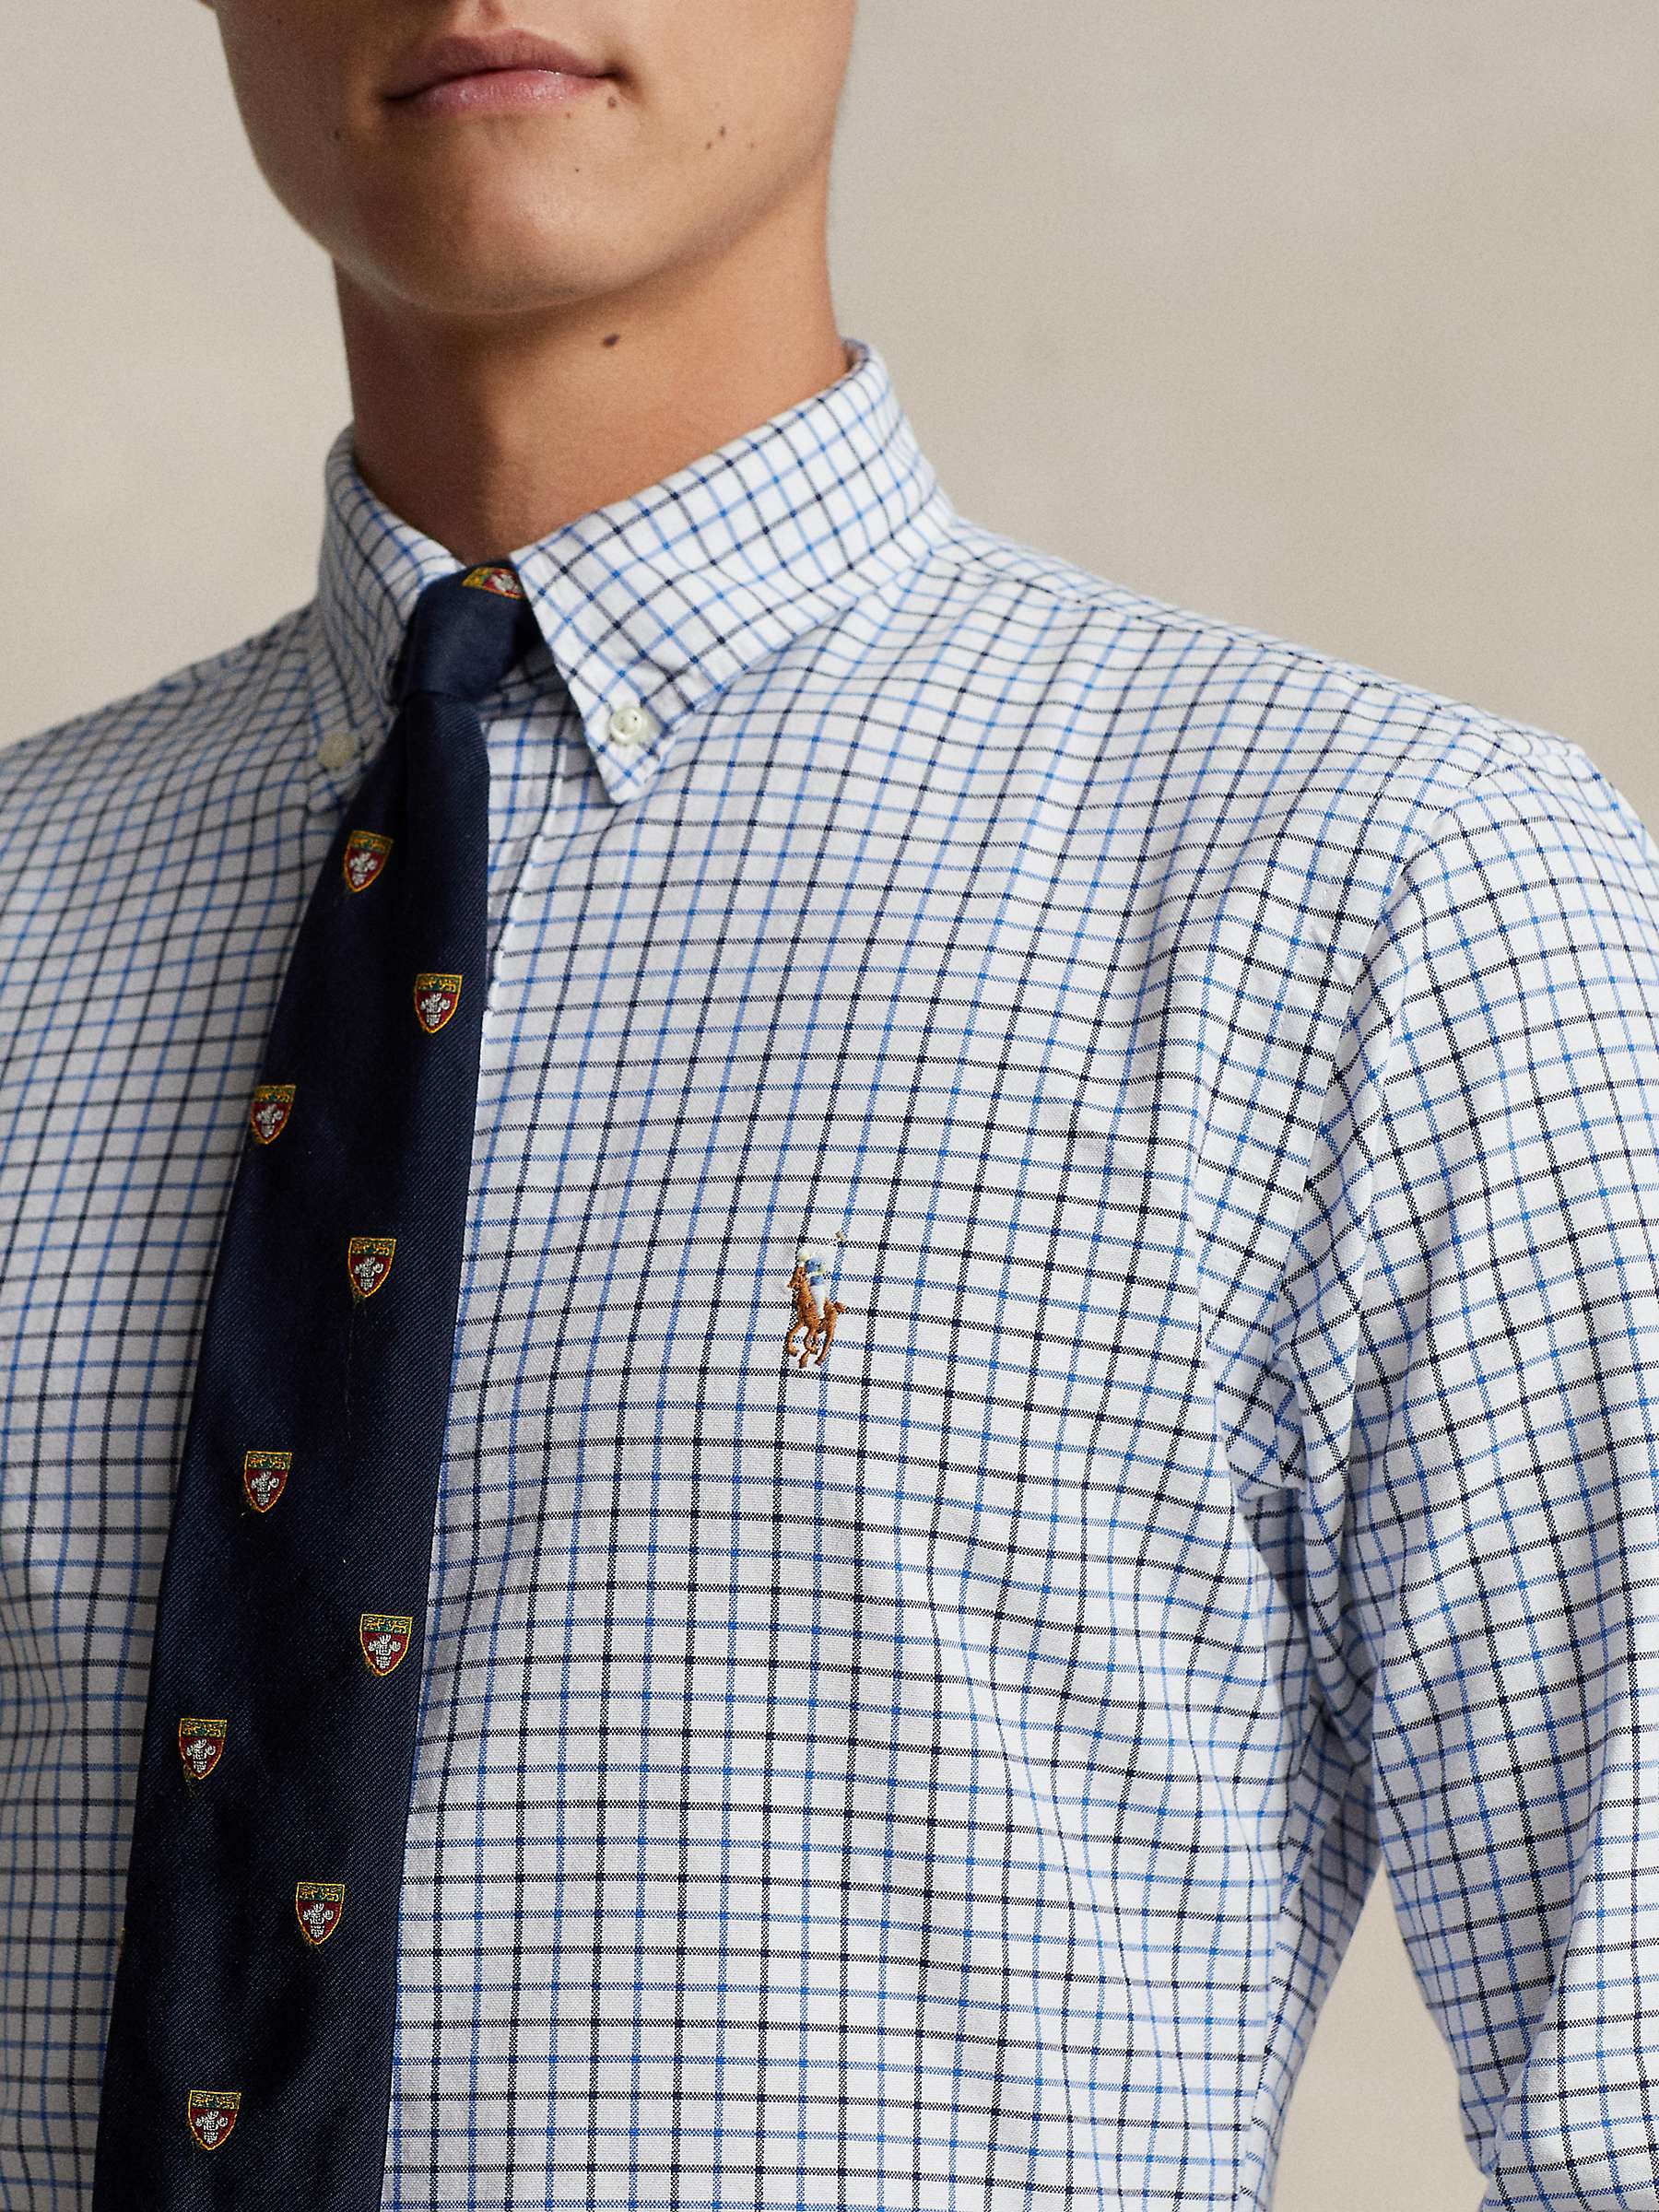 Buy Polo Ralph Lauren Tailored Fit Tattersall Oxford Check Shirt, White/Blue Online at johnlewis.com